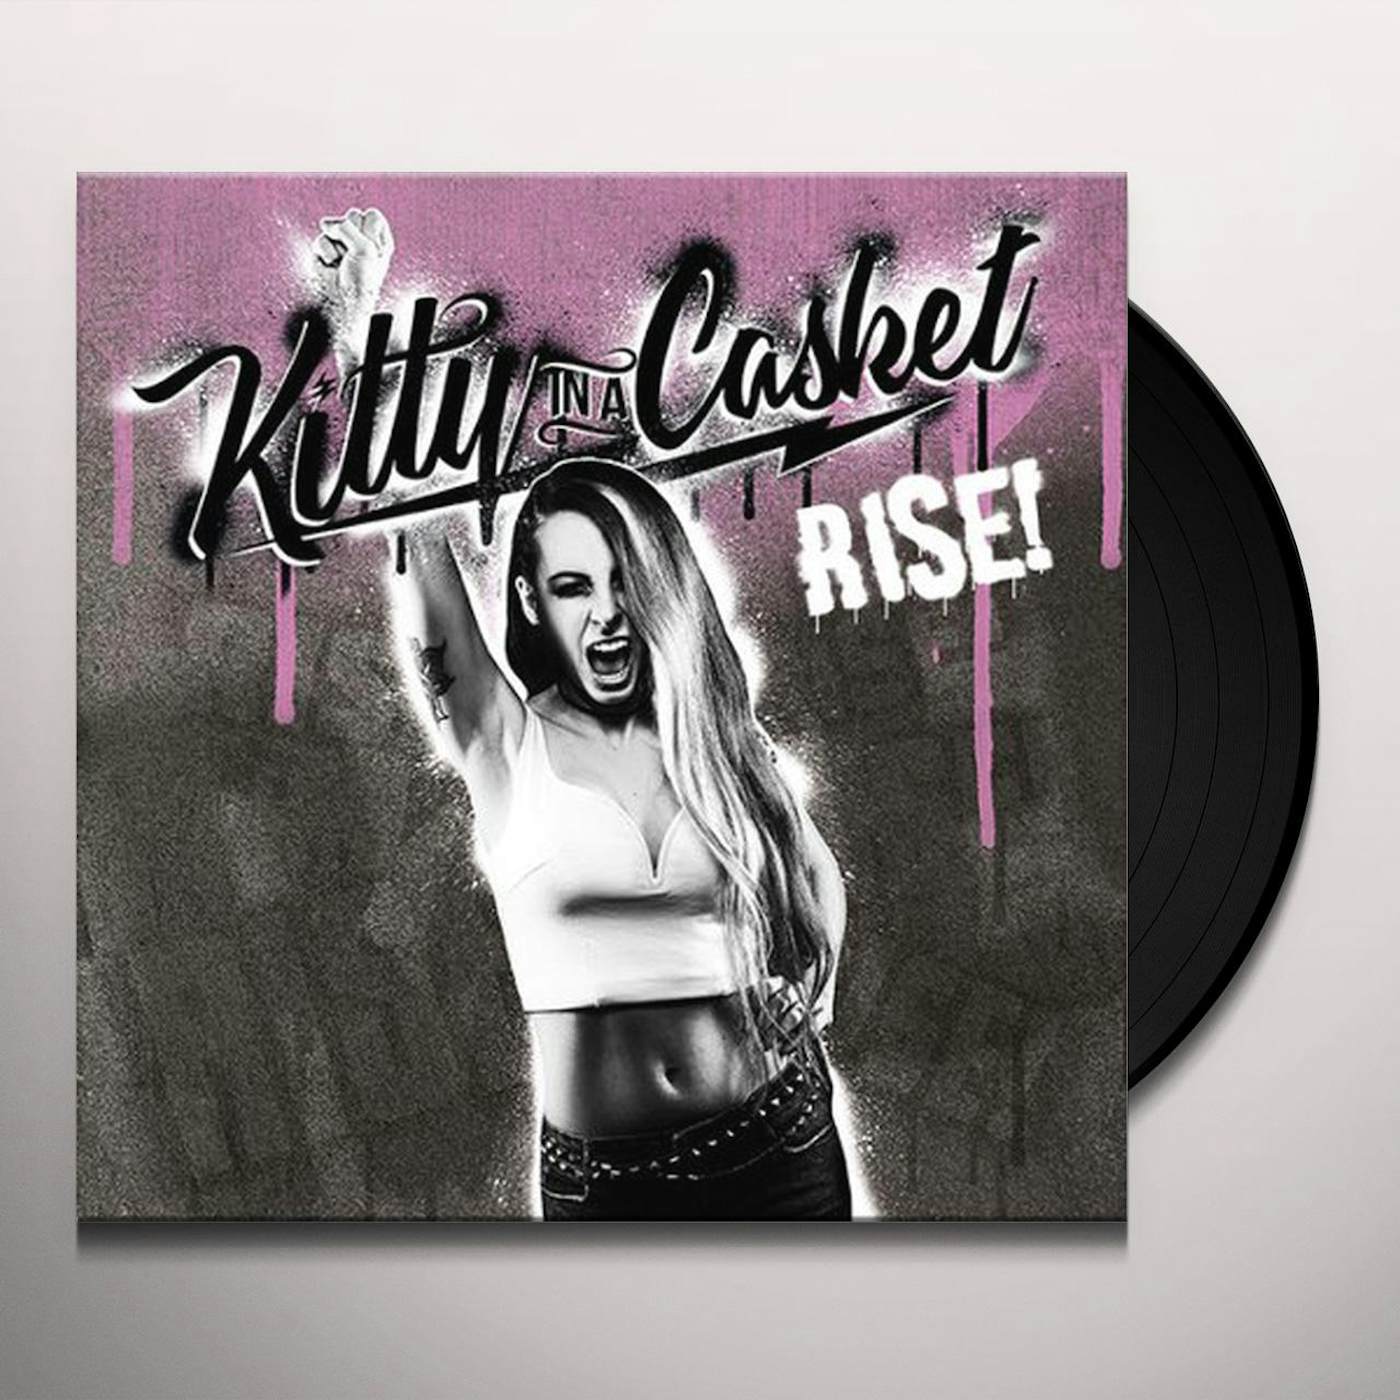 Kitty In A Casket Rise Vinyl Record